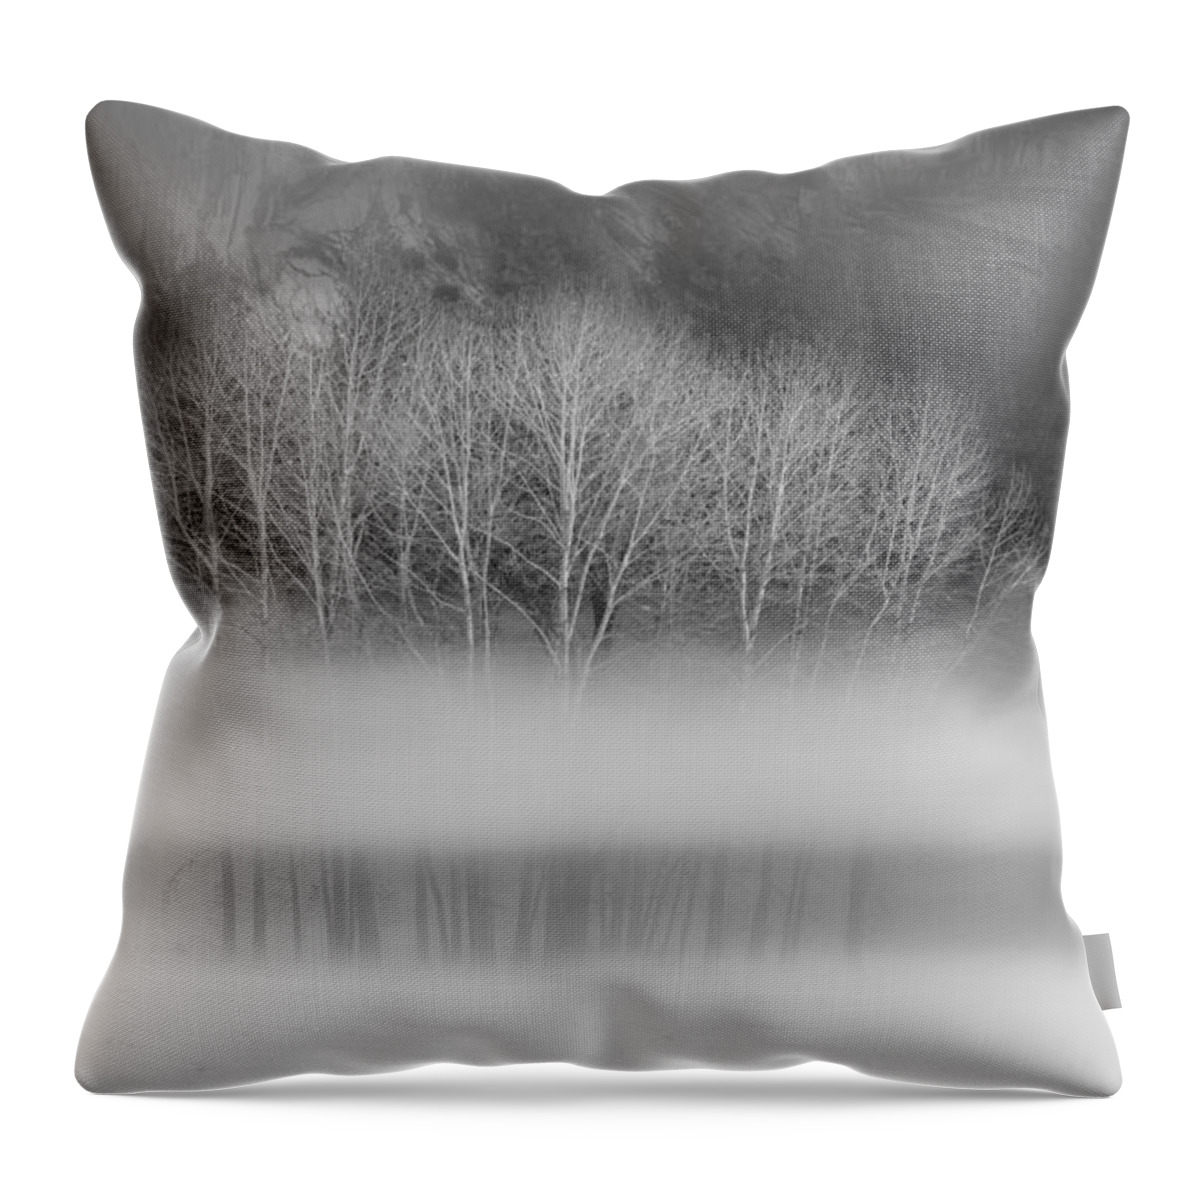 Yosemite National Park Throw Pillow featuring the photograph Naked aspens in the Yosemite fog, black and white by Alessandra RC